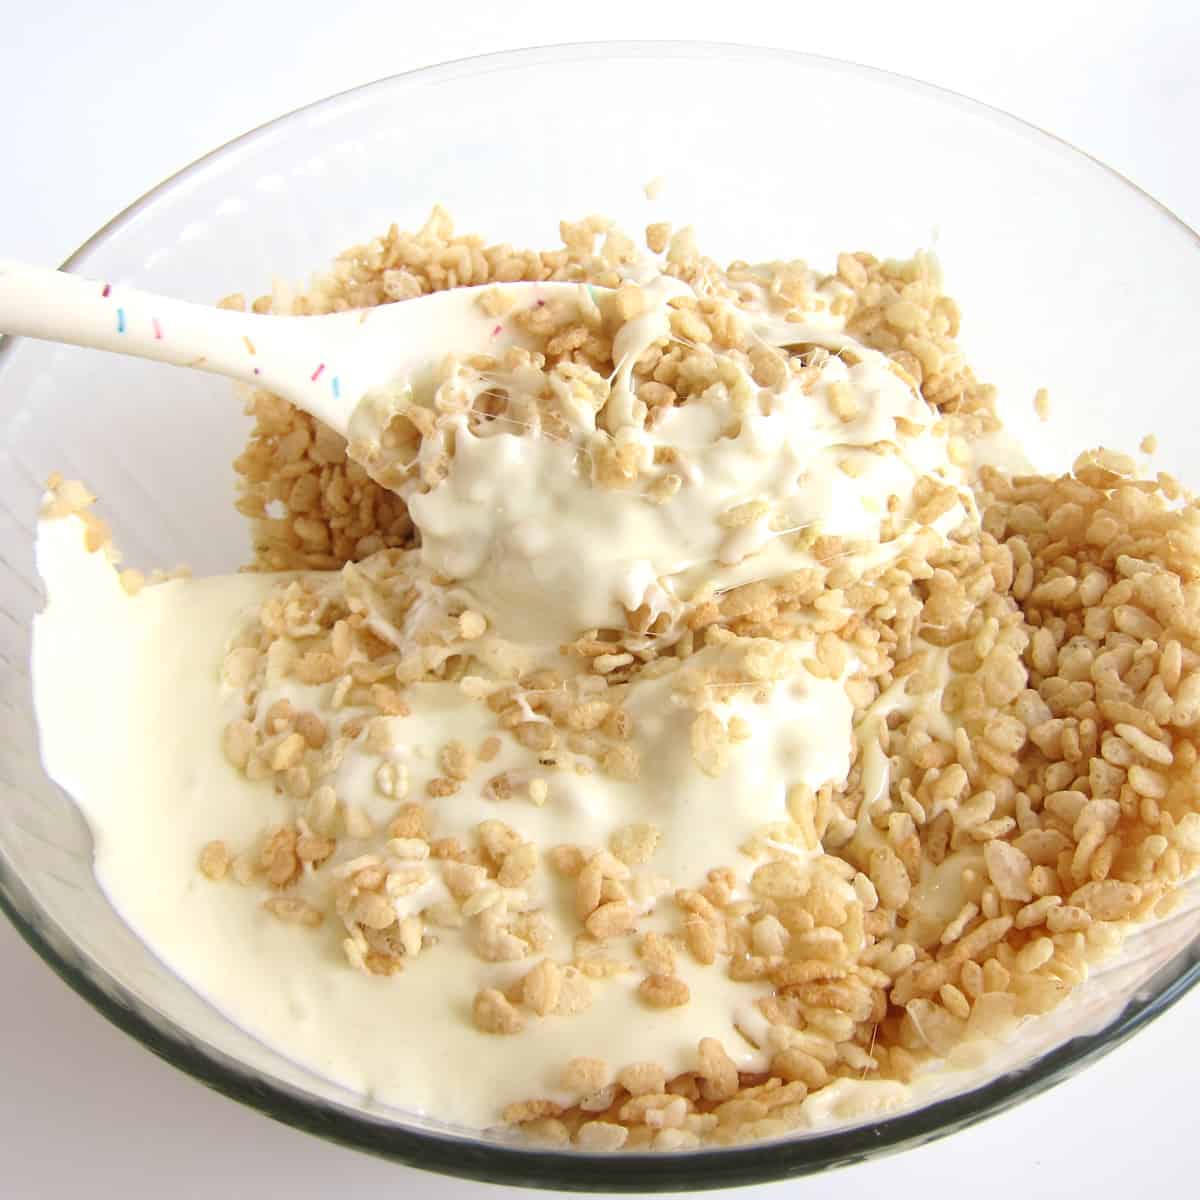 Stirring the melted white chocolate marshmallows into the crisp rice cereal.